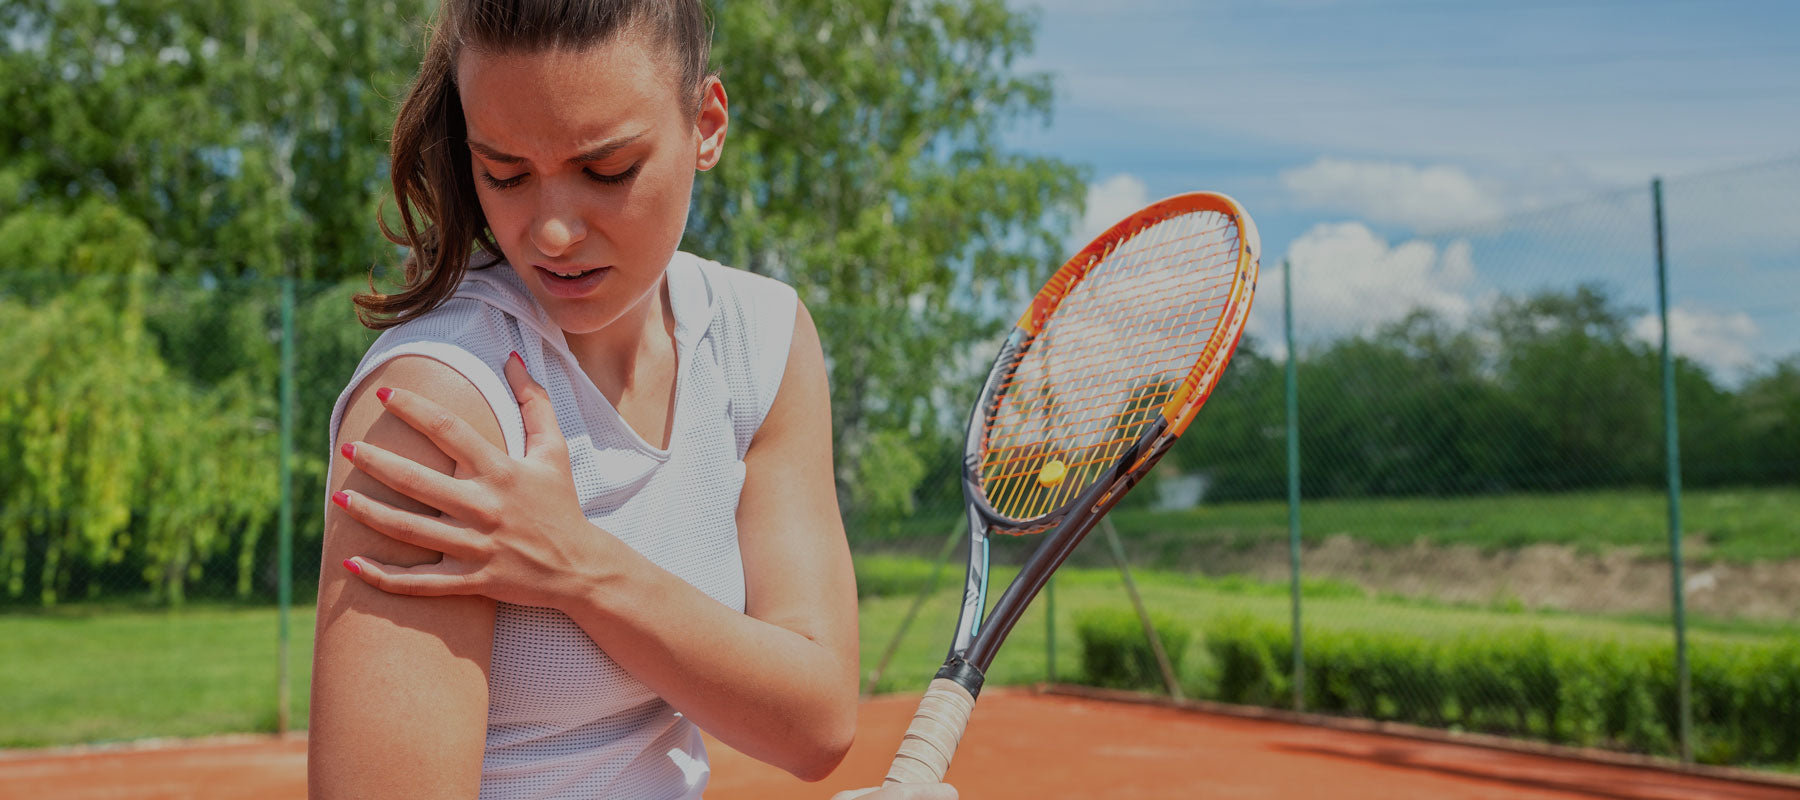 woman playing tennis with shoulder pain 